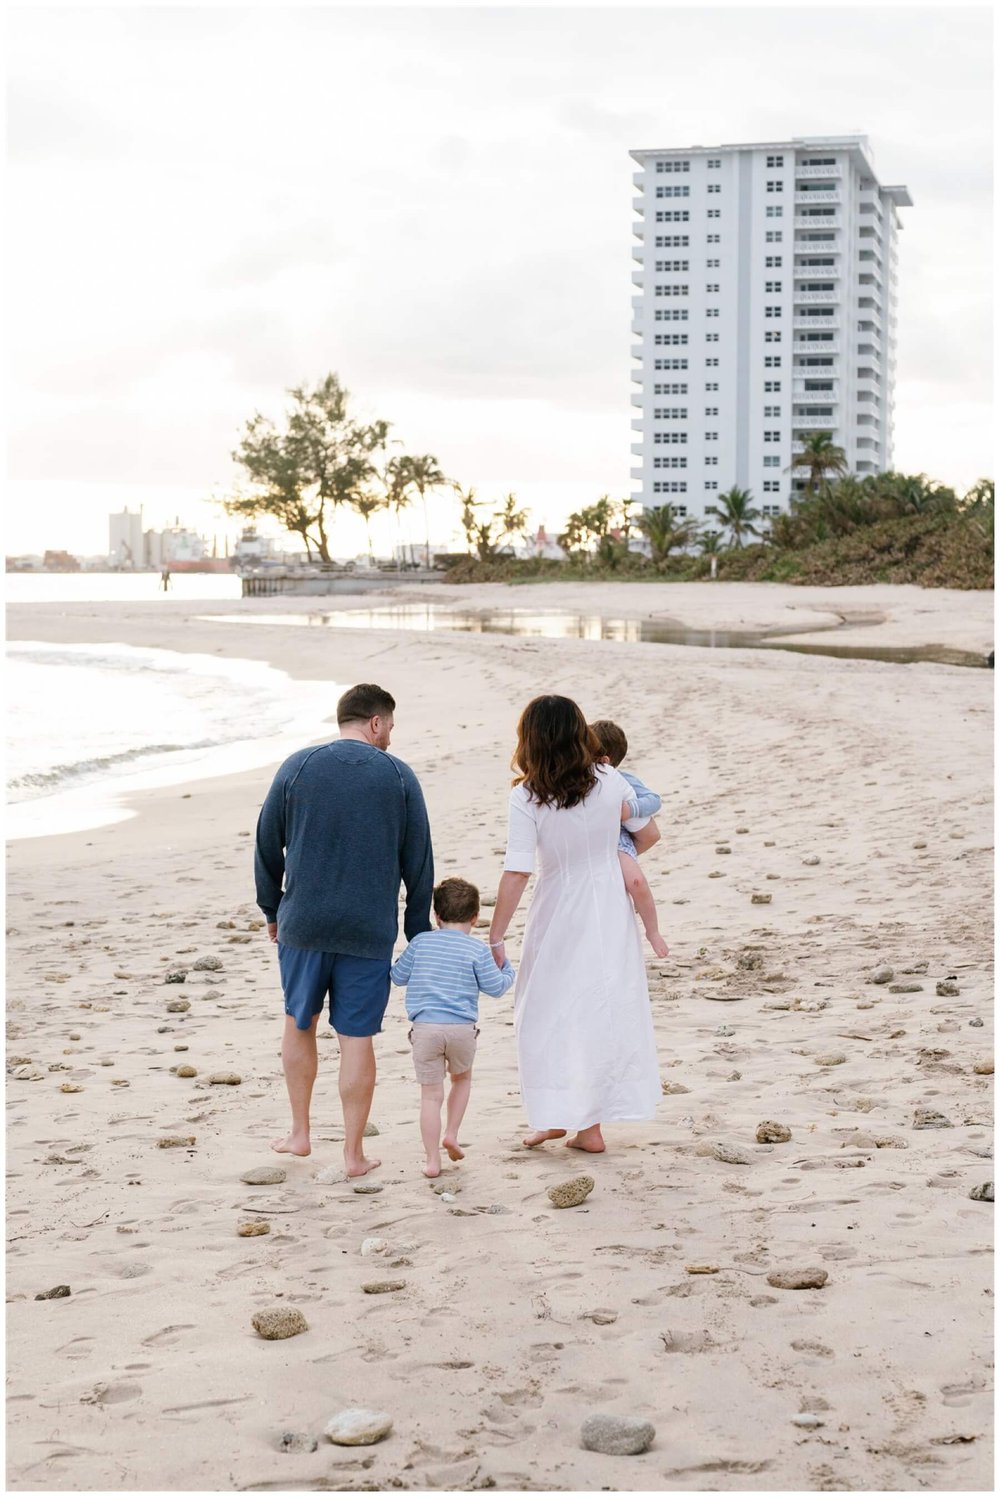 Family with two young boys walking on beach in Fort Lauderdale